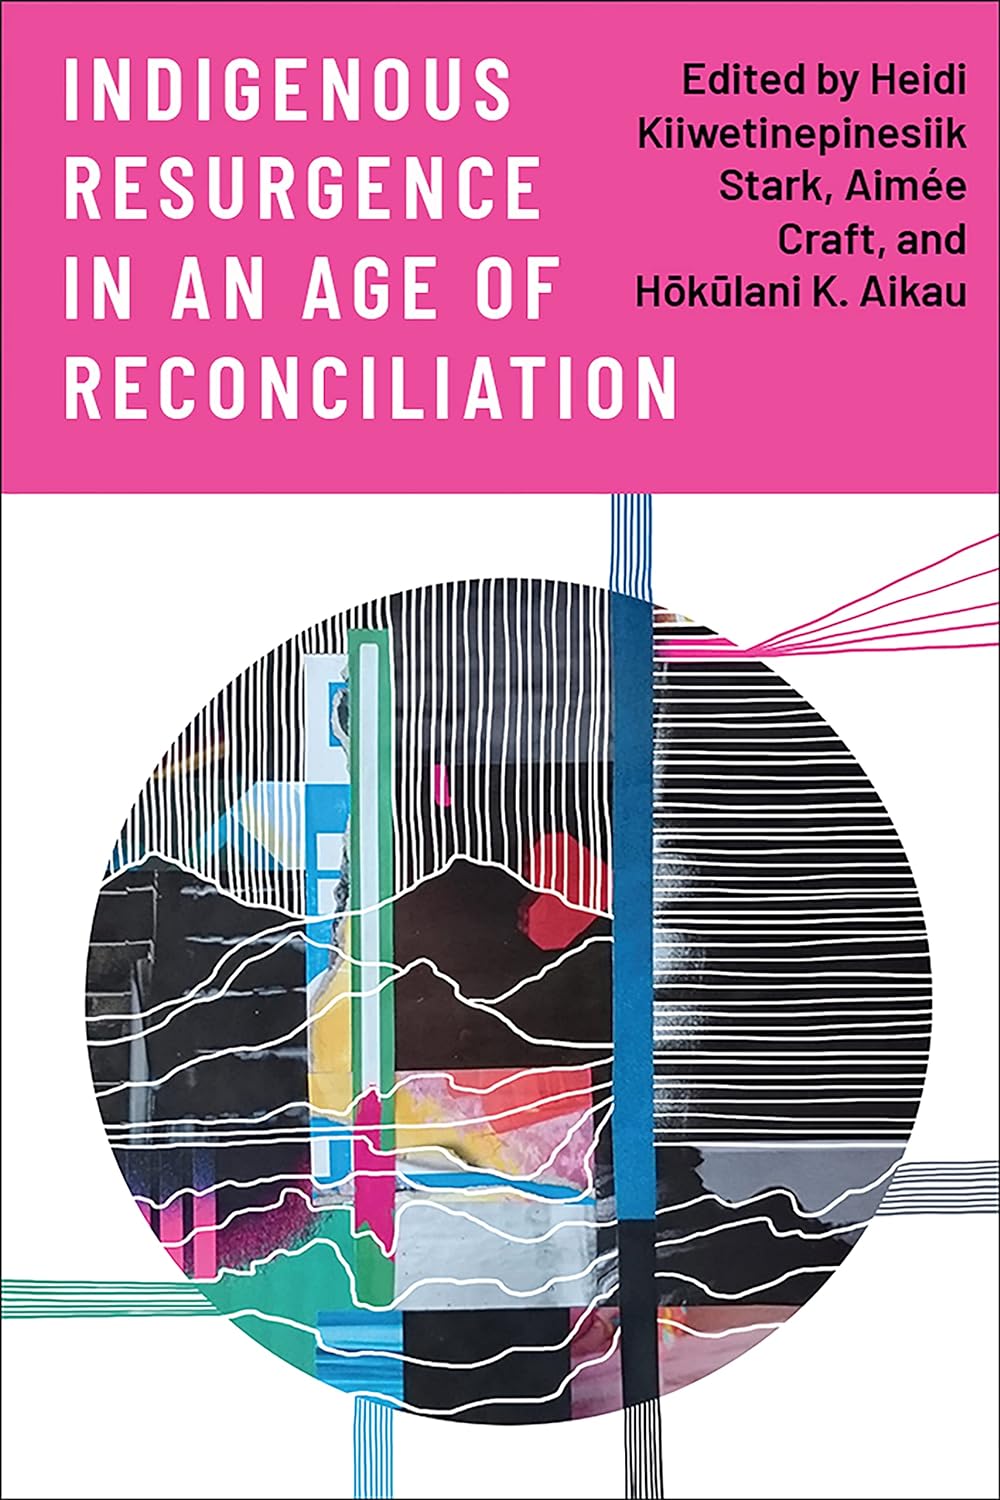 Indigenous Resurgence in an Age of Reconciliation edited by Heidi Kiiwetinepinesiik Stark et. al